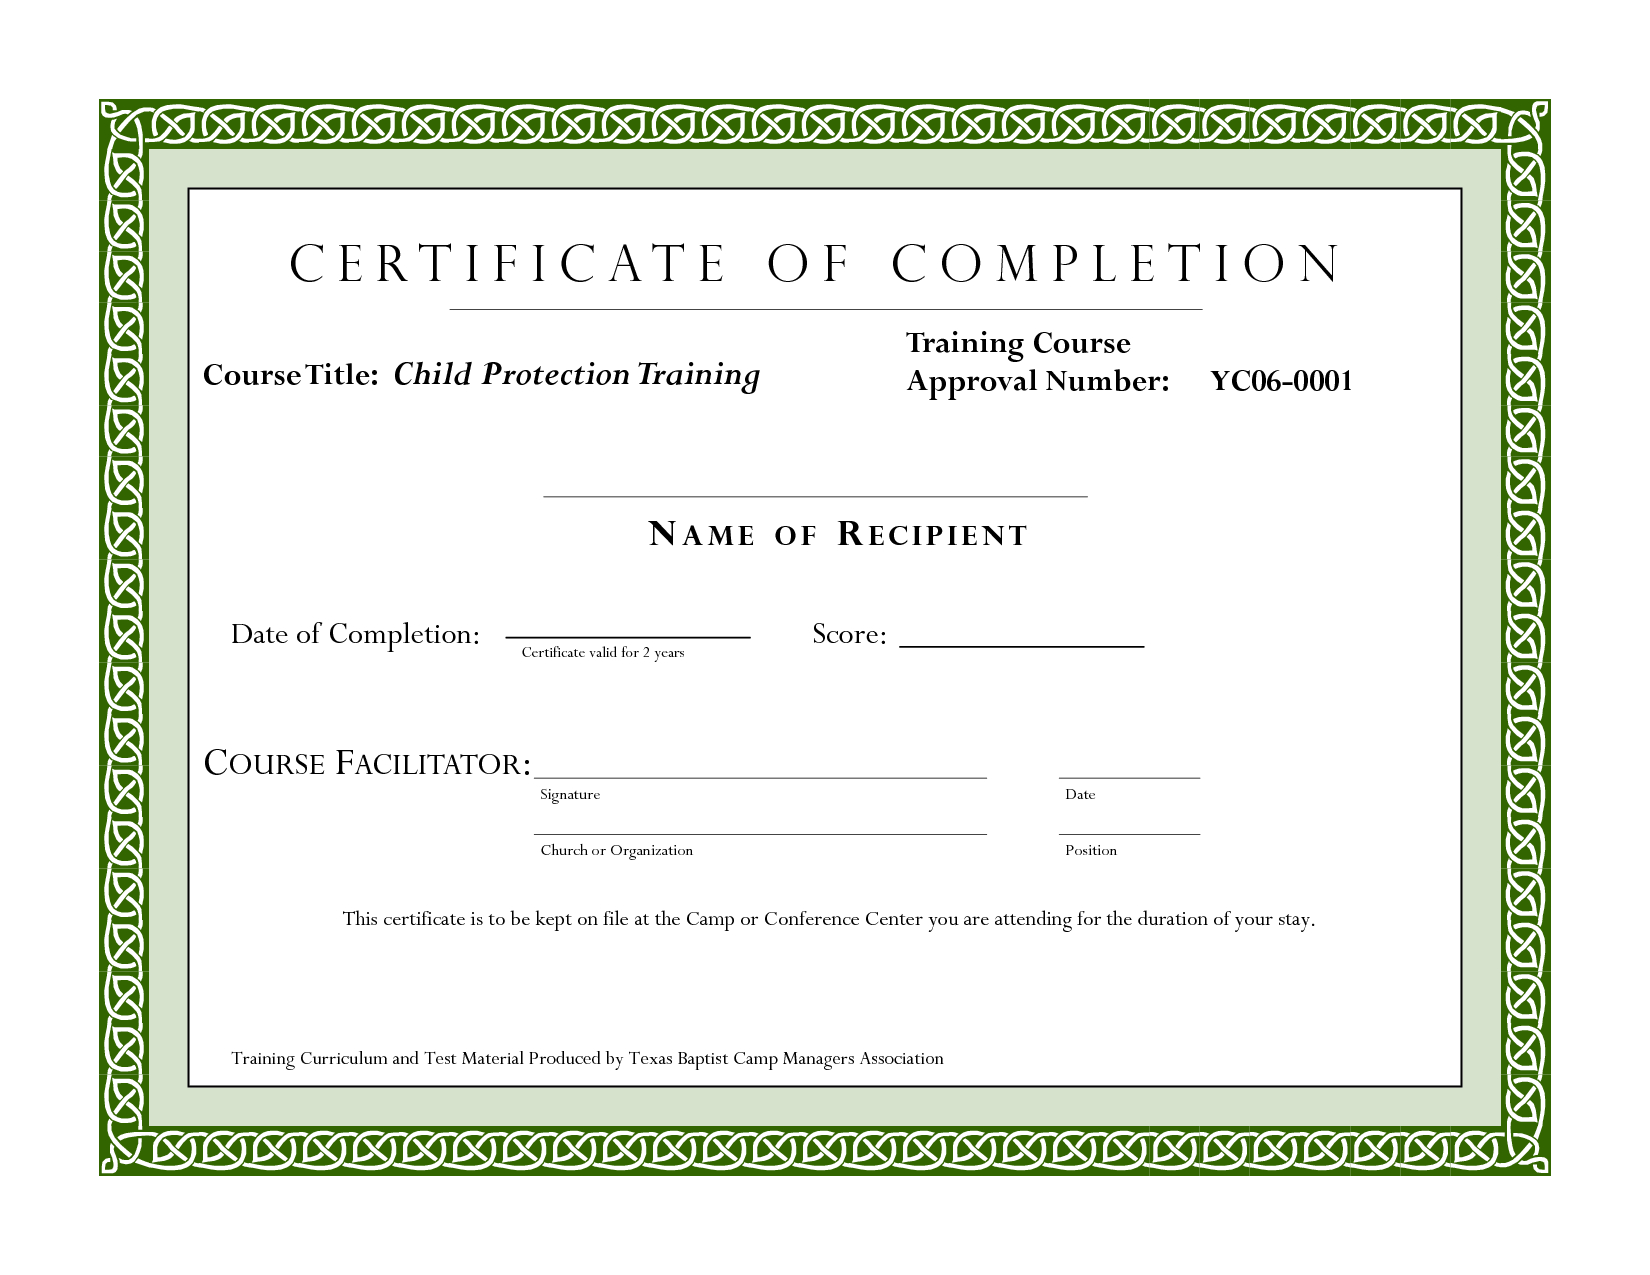 Course Completion Certificate Template | Certificate Of Inside Certification Of Completion Template